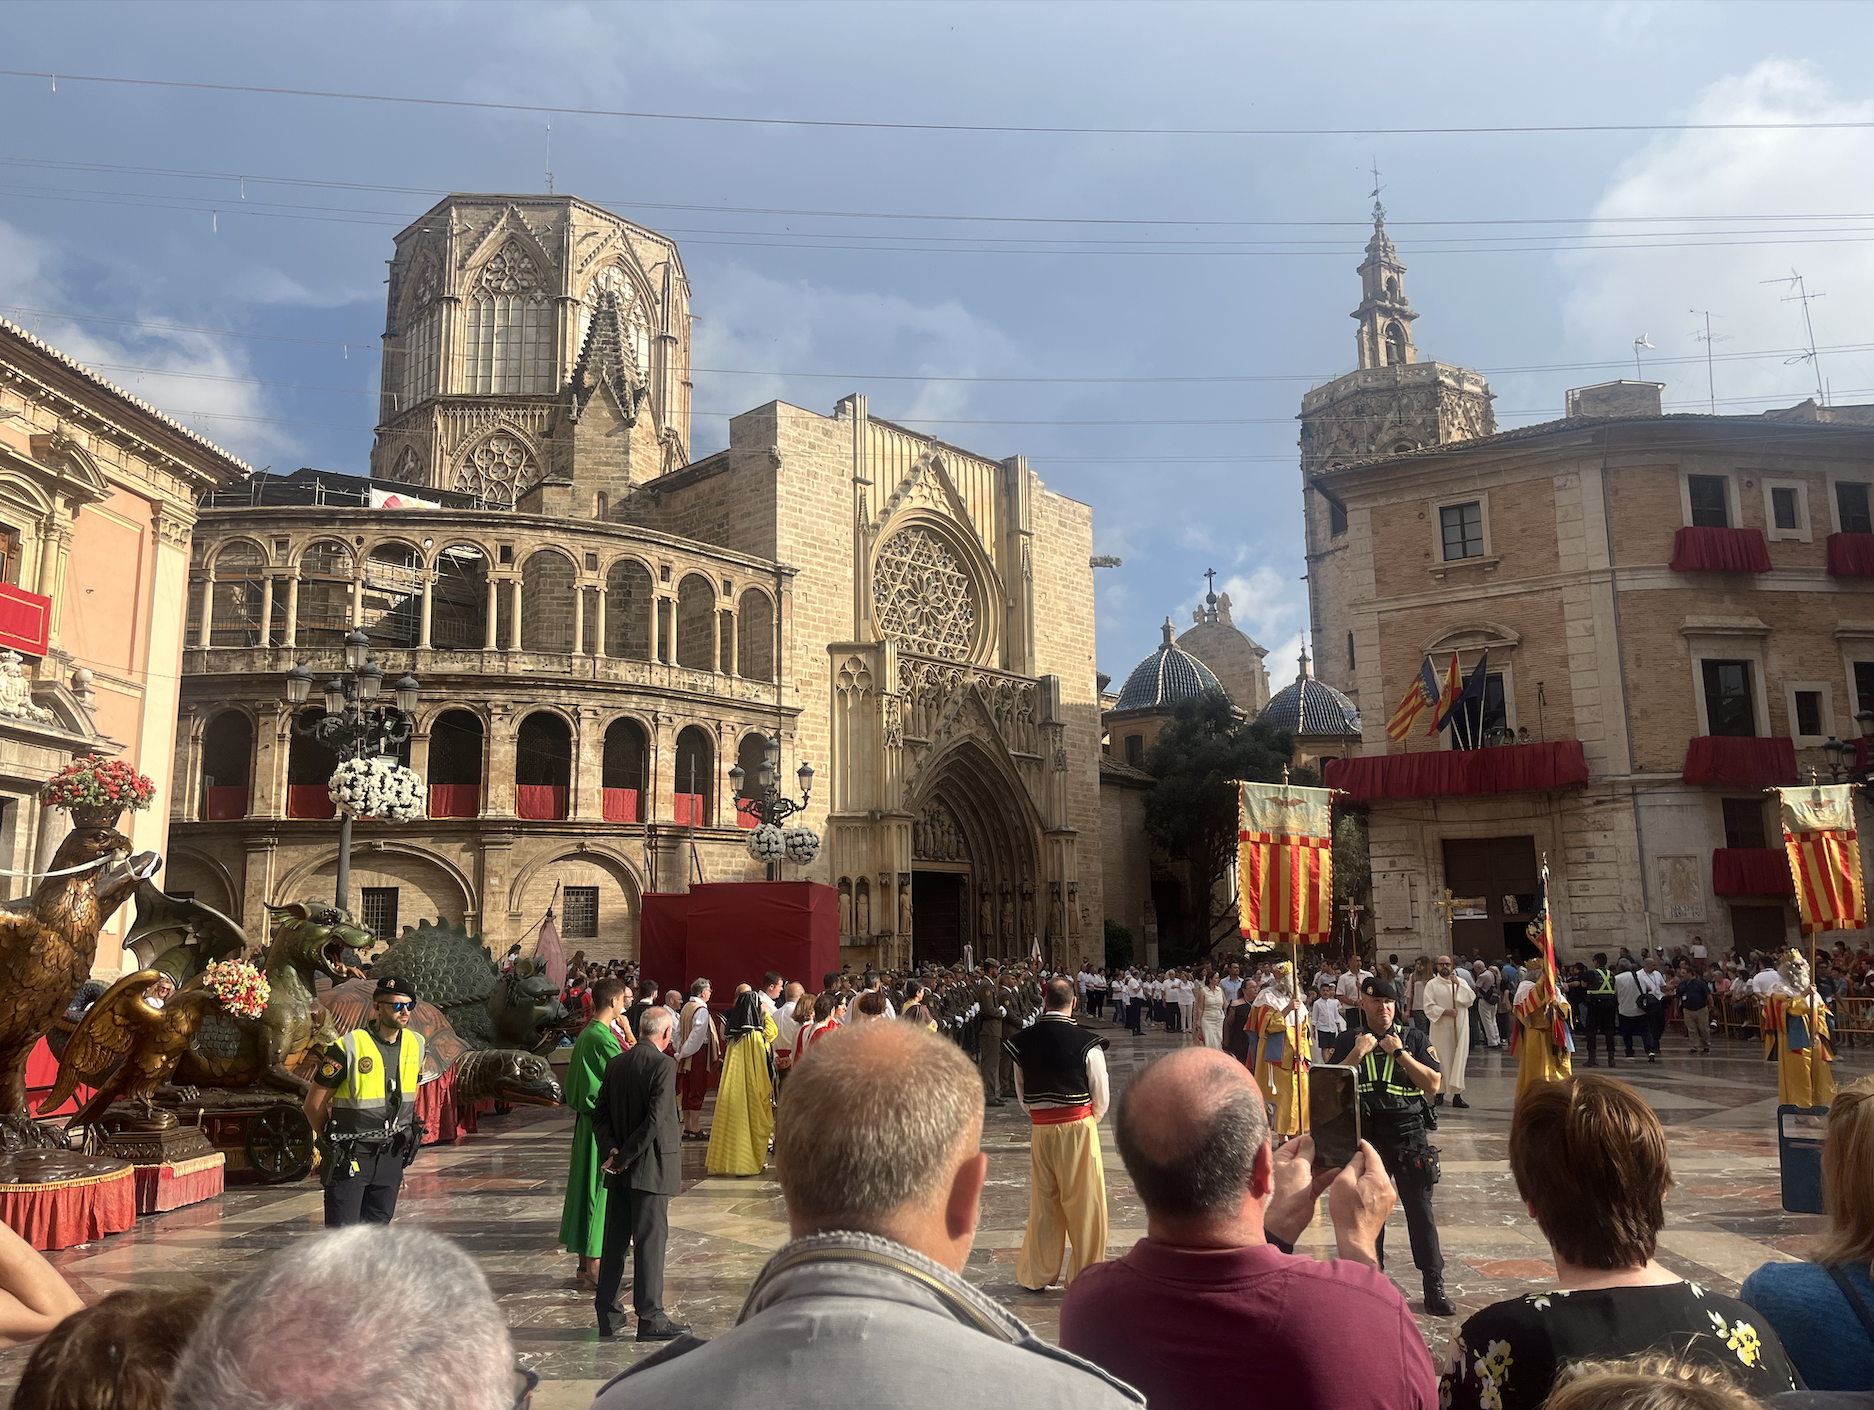 Watching Corpus Christi Festival in the city center